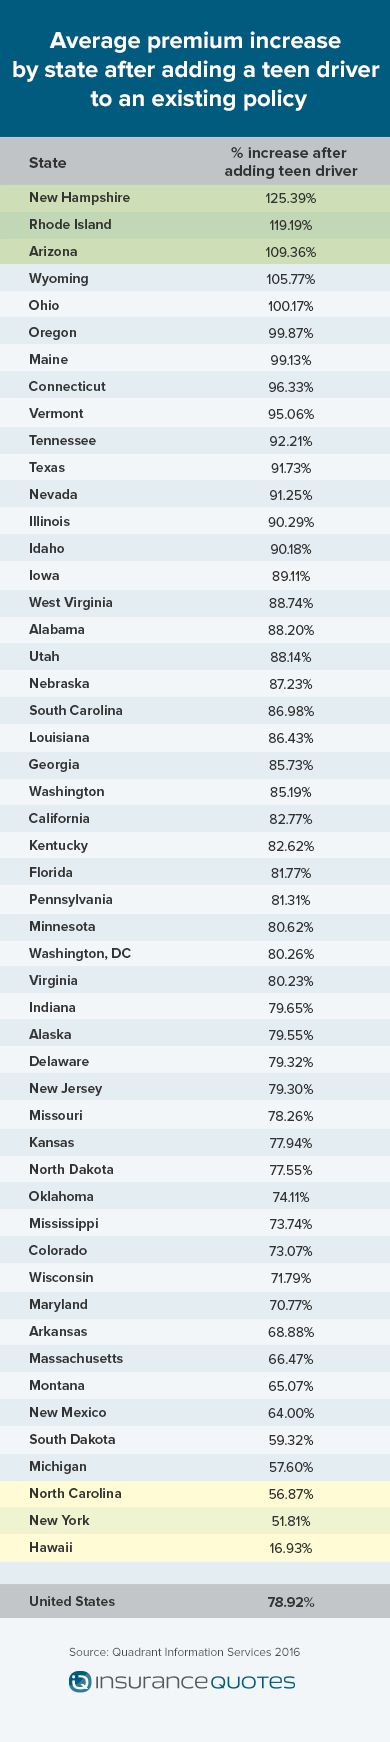 Average Premium Increase by State for Adding Teens